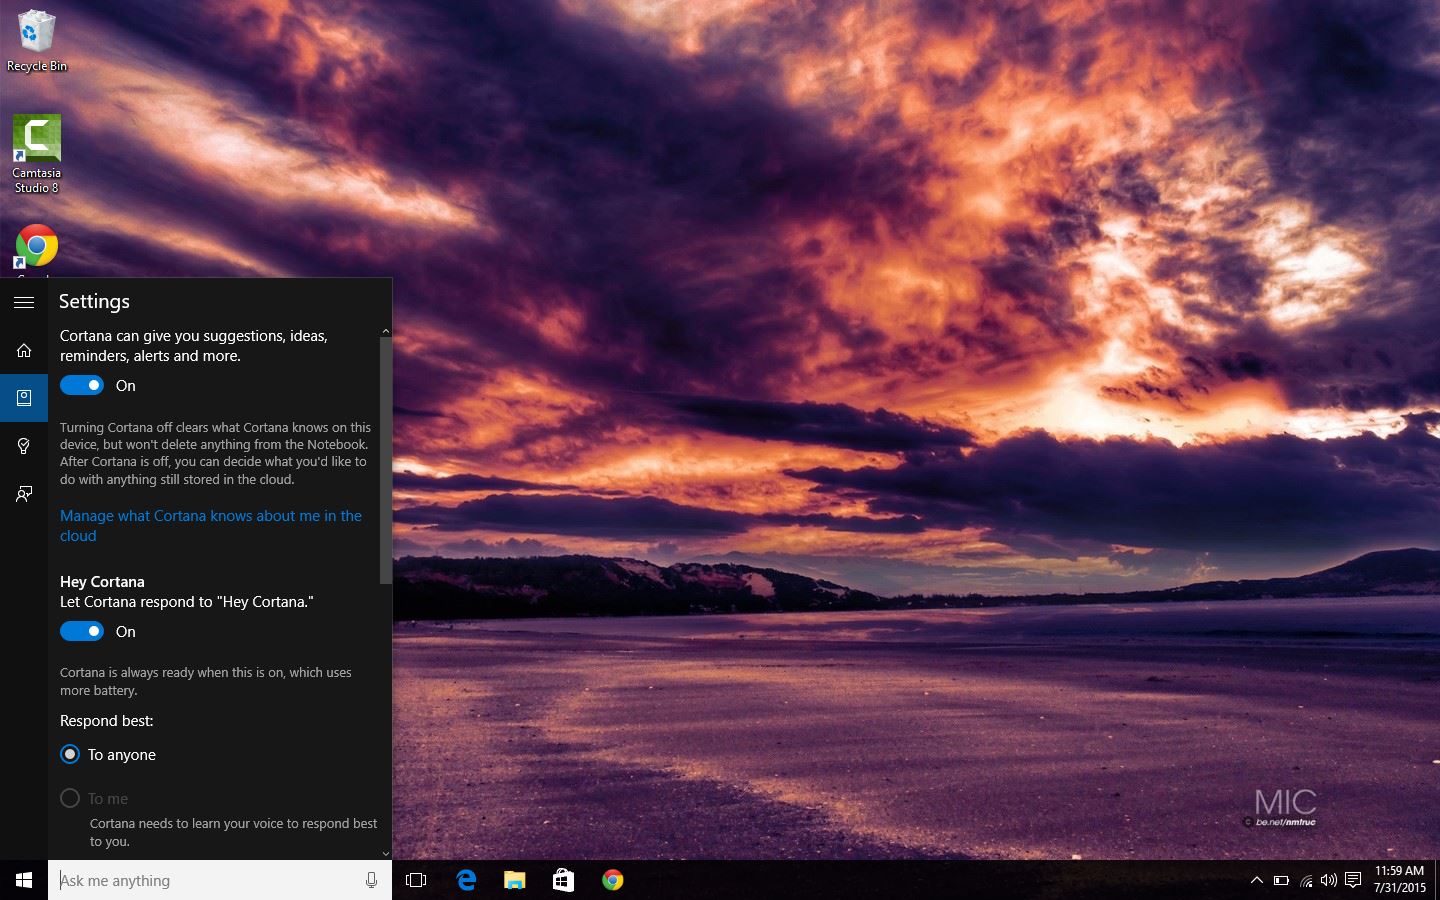 How to temporarily turn off Cortana without completely disabling it